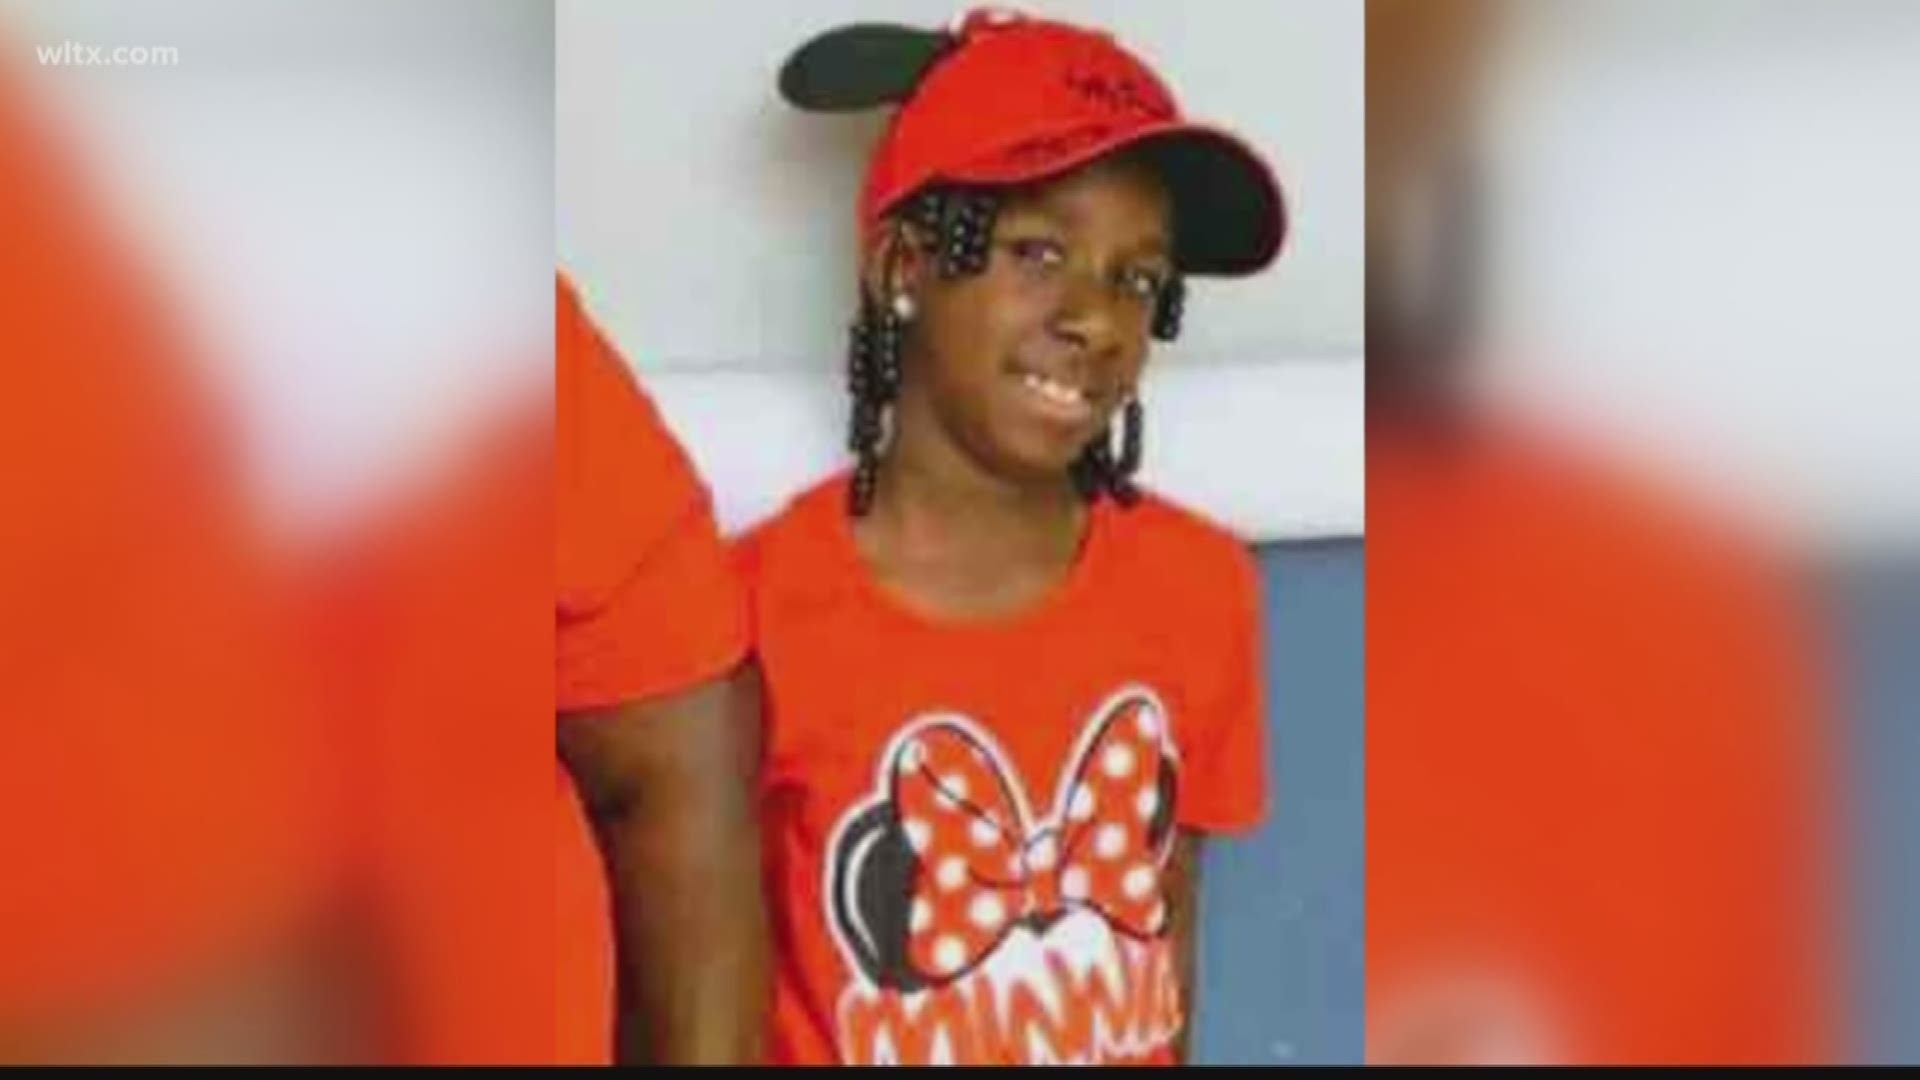 Raniya Wright, a 10-year-old who died in a south Carolina classroom, died of natural causes, investigators say. But her family says she was bullied.